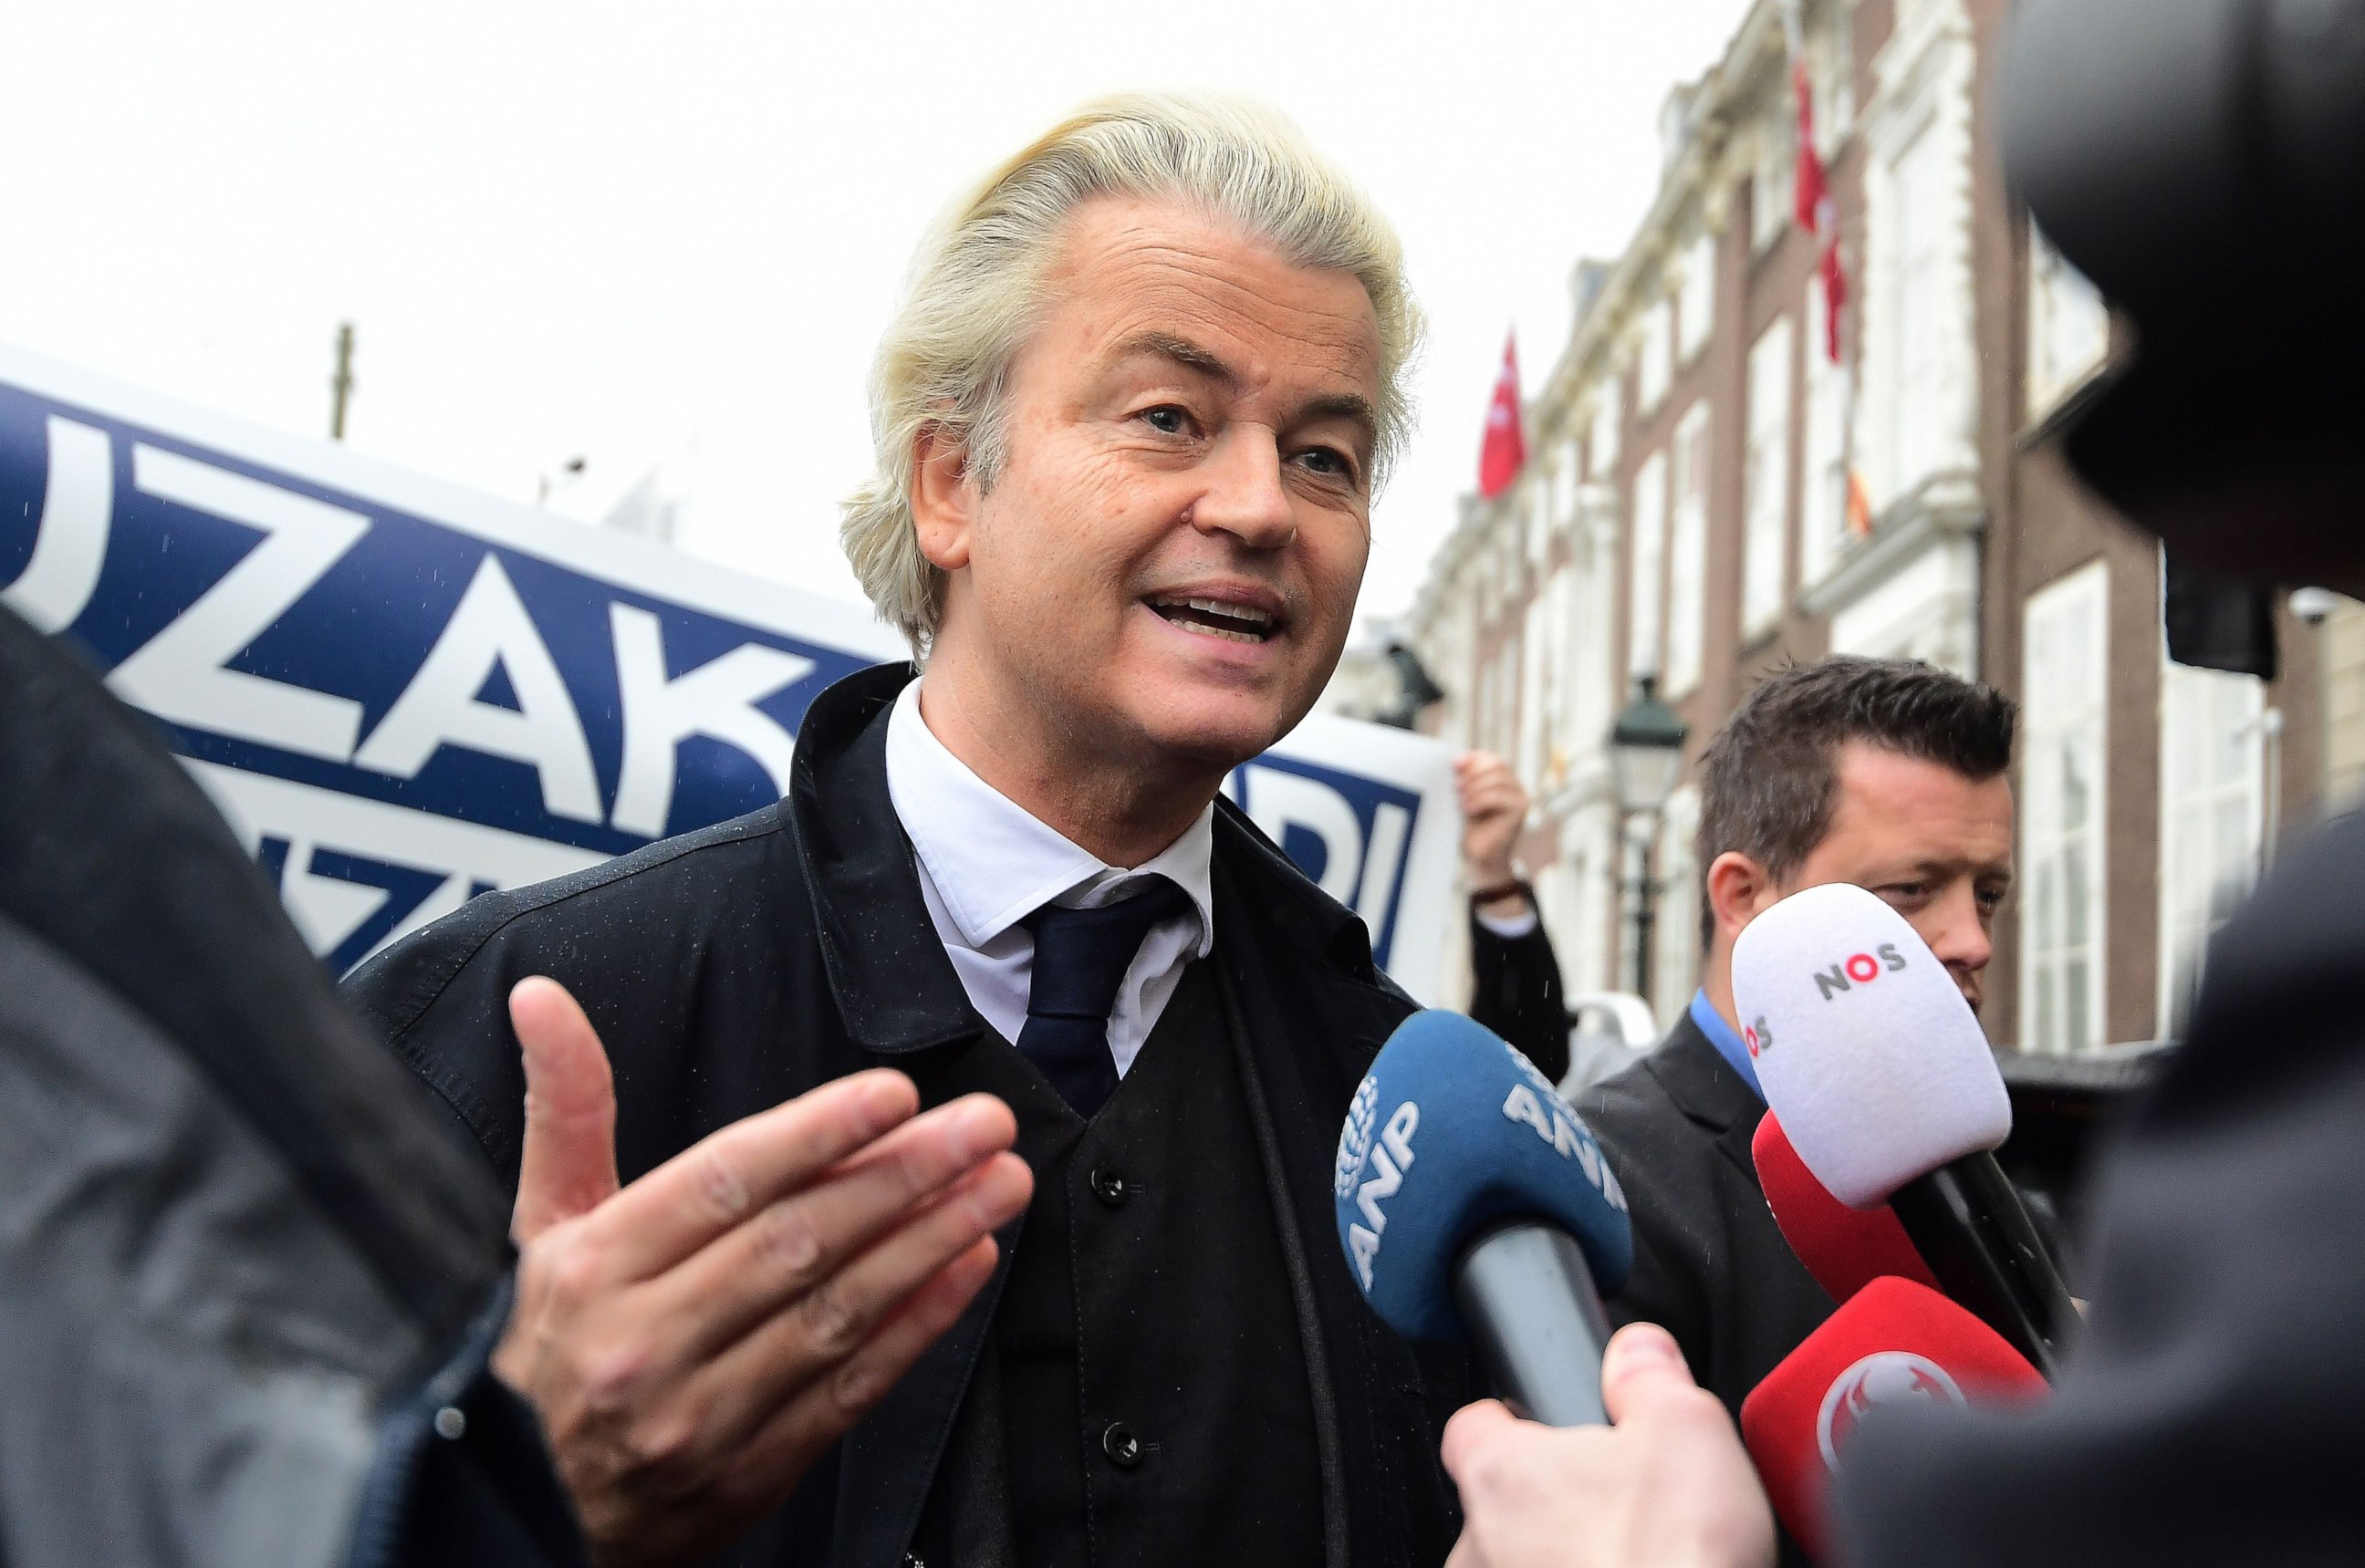 PHOTO: Dutch far-right Freedom Party leader (Partij Voor De Vrijheid, PVV) Geert Wilders speaks to journalists during a protest in front of the Turkish embassy at The Hague, The Netherlands, on March 8, 2017. 
